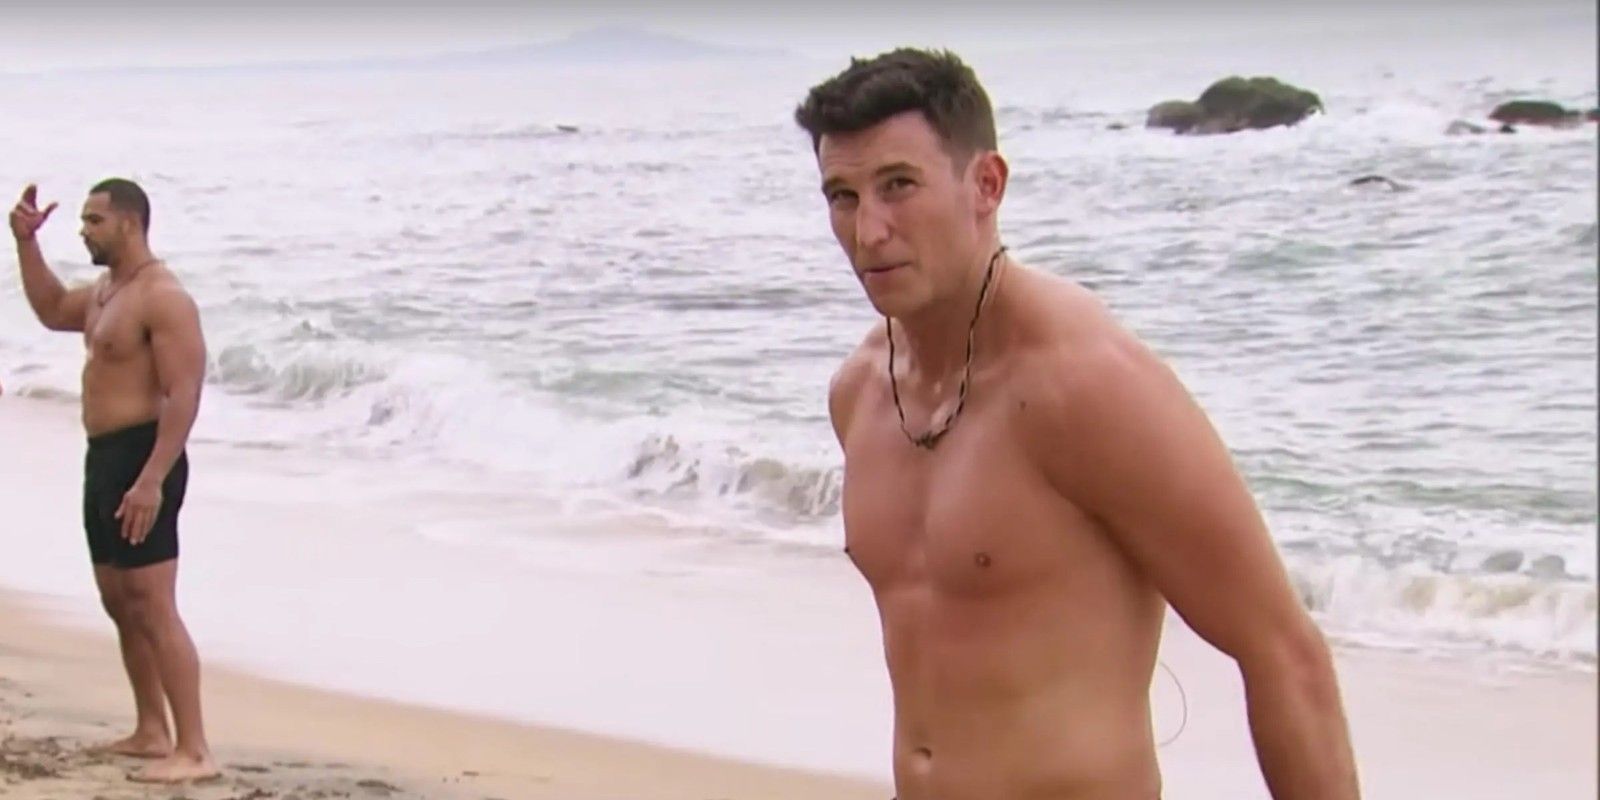 More Bachelor in Paradise to come with Blake Horstmann